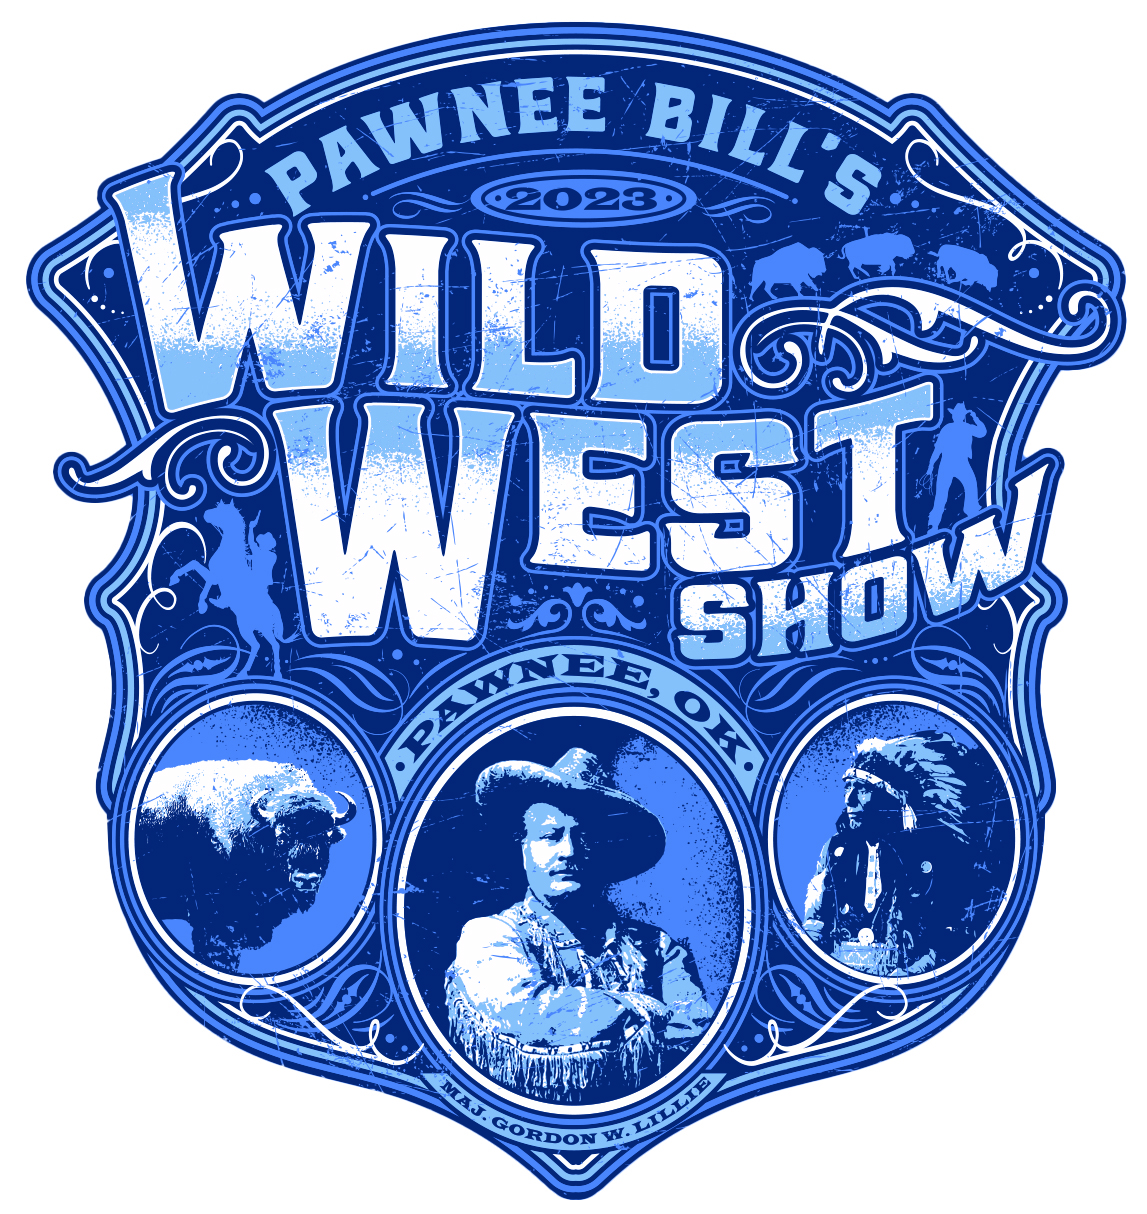 Pawnee Bill's Wild West Show logo with images of a bison, Pawnee Bill, and a man wearing in a war bonnet atop an intricate shield.